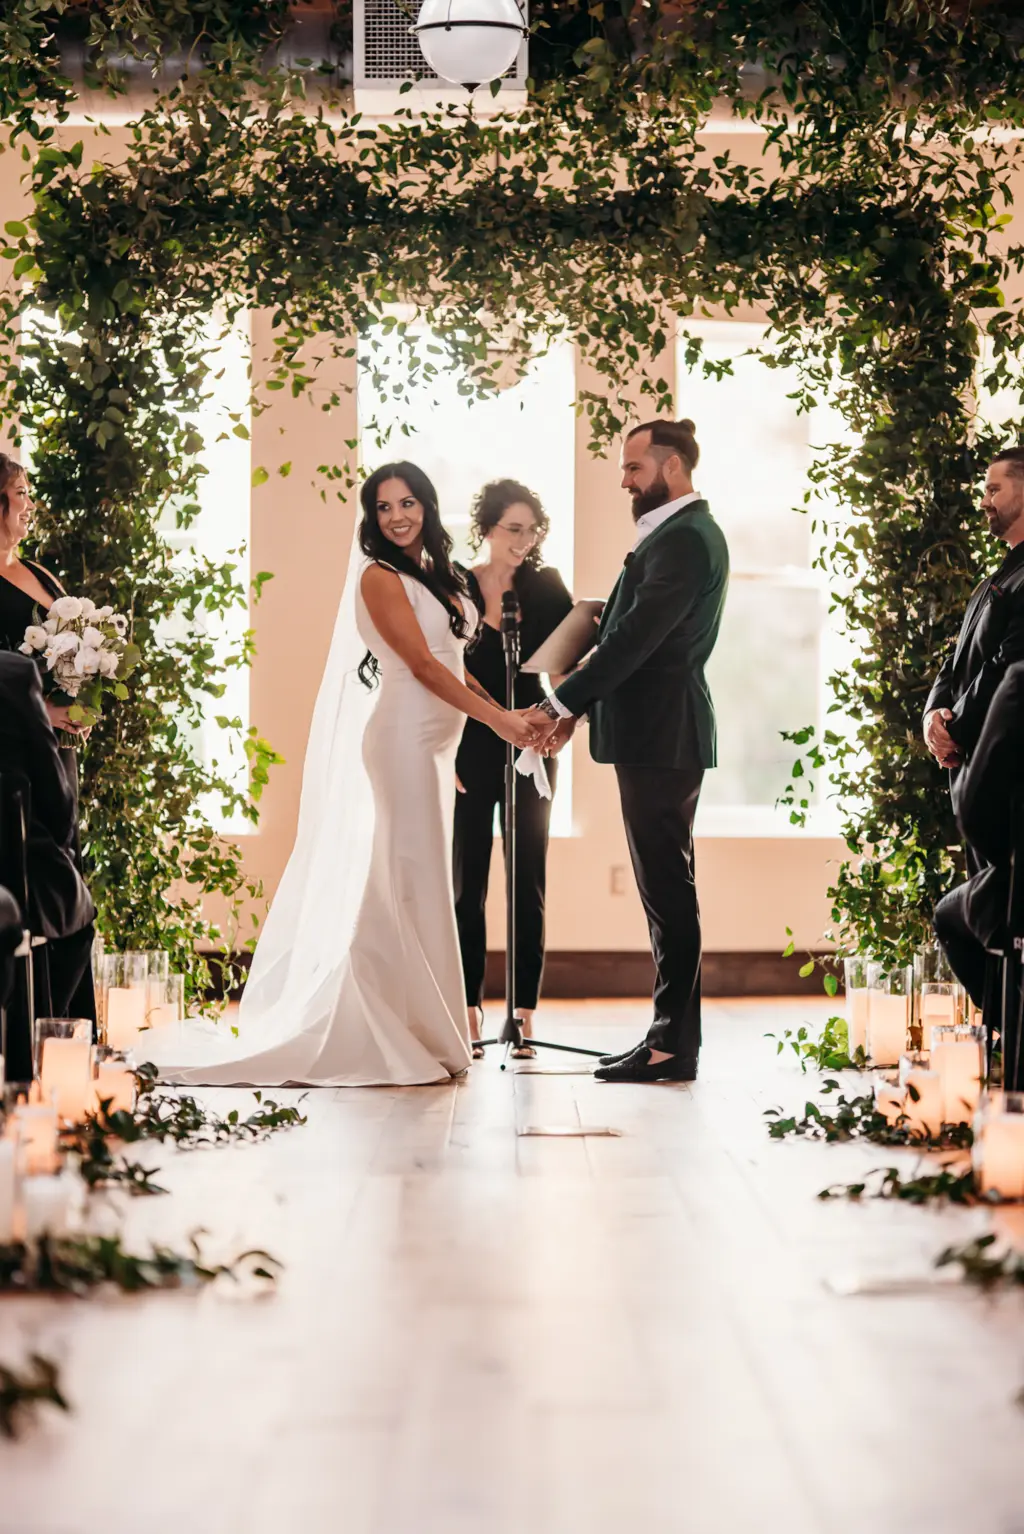 Classic Cascading Lush Greenery Arch Decor Ideas | Modern Black and White Indoor Wedding Ceremony Inspiration